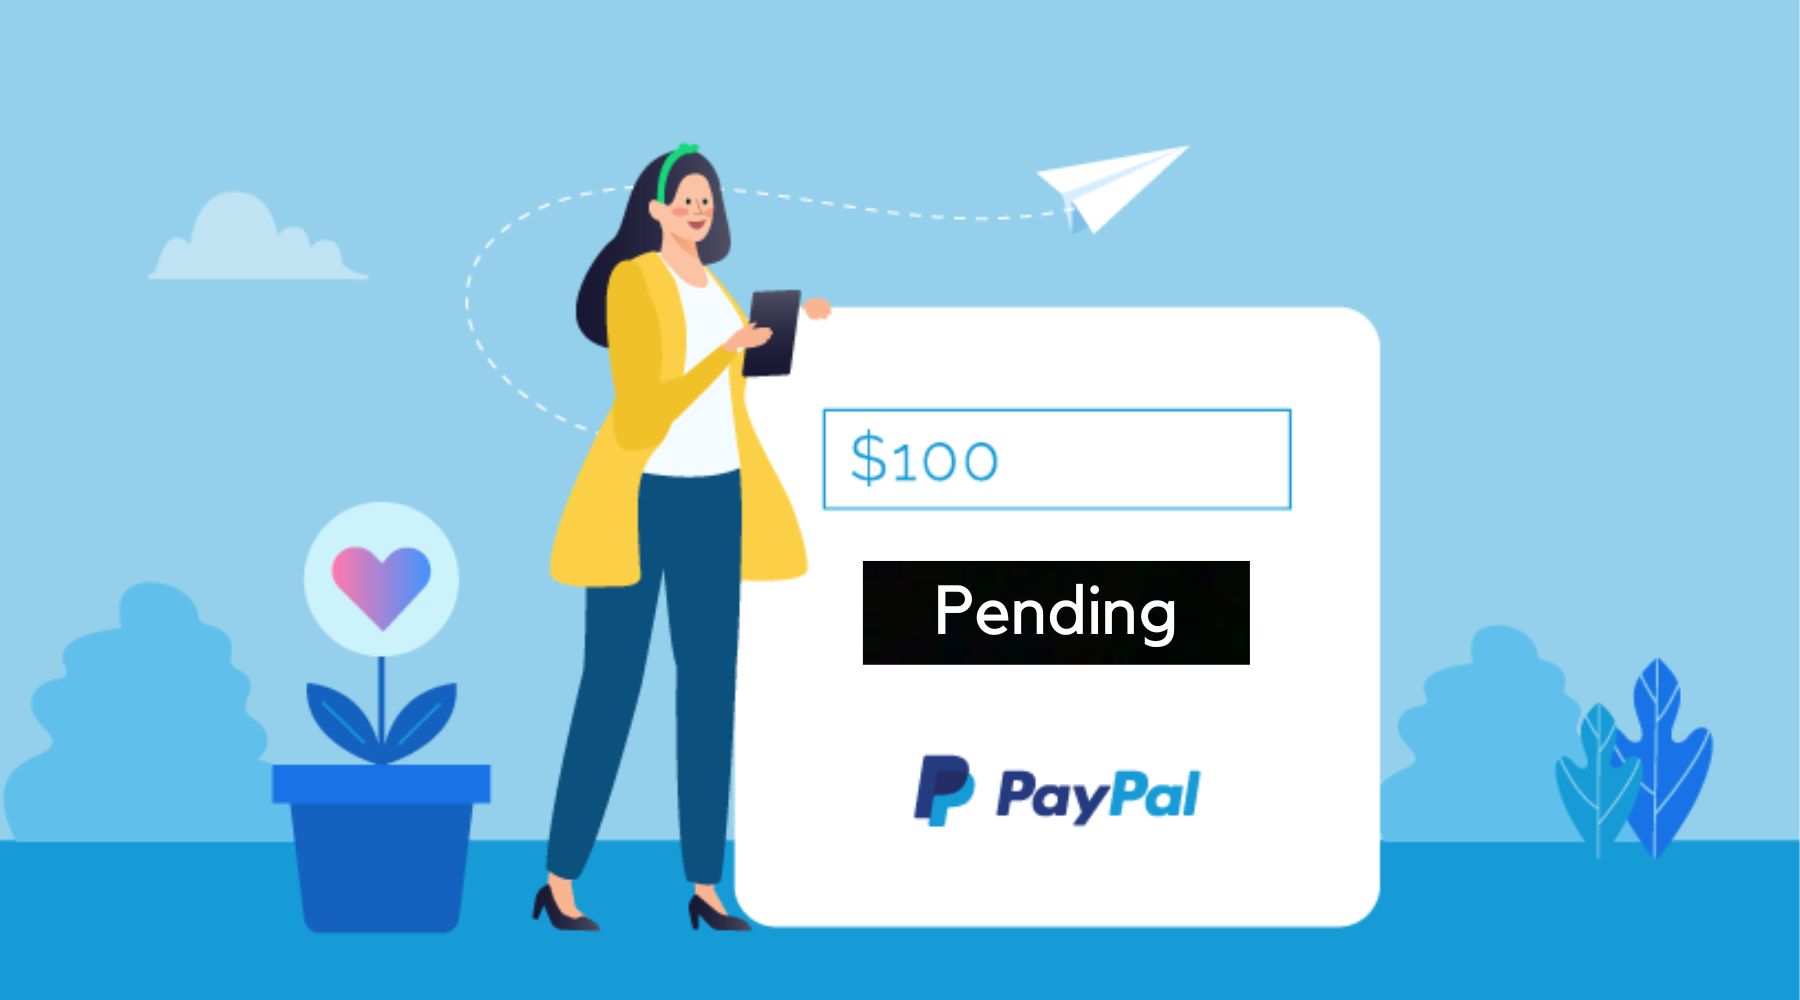 Information about PayPal order tracking and reasons why transactions are pending on PayPal